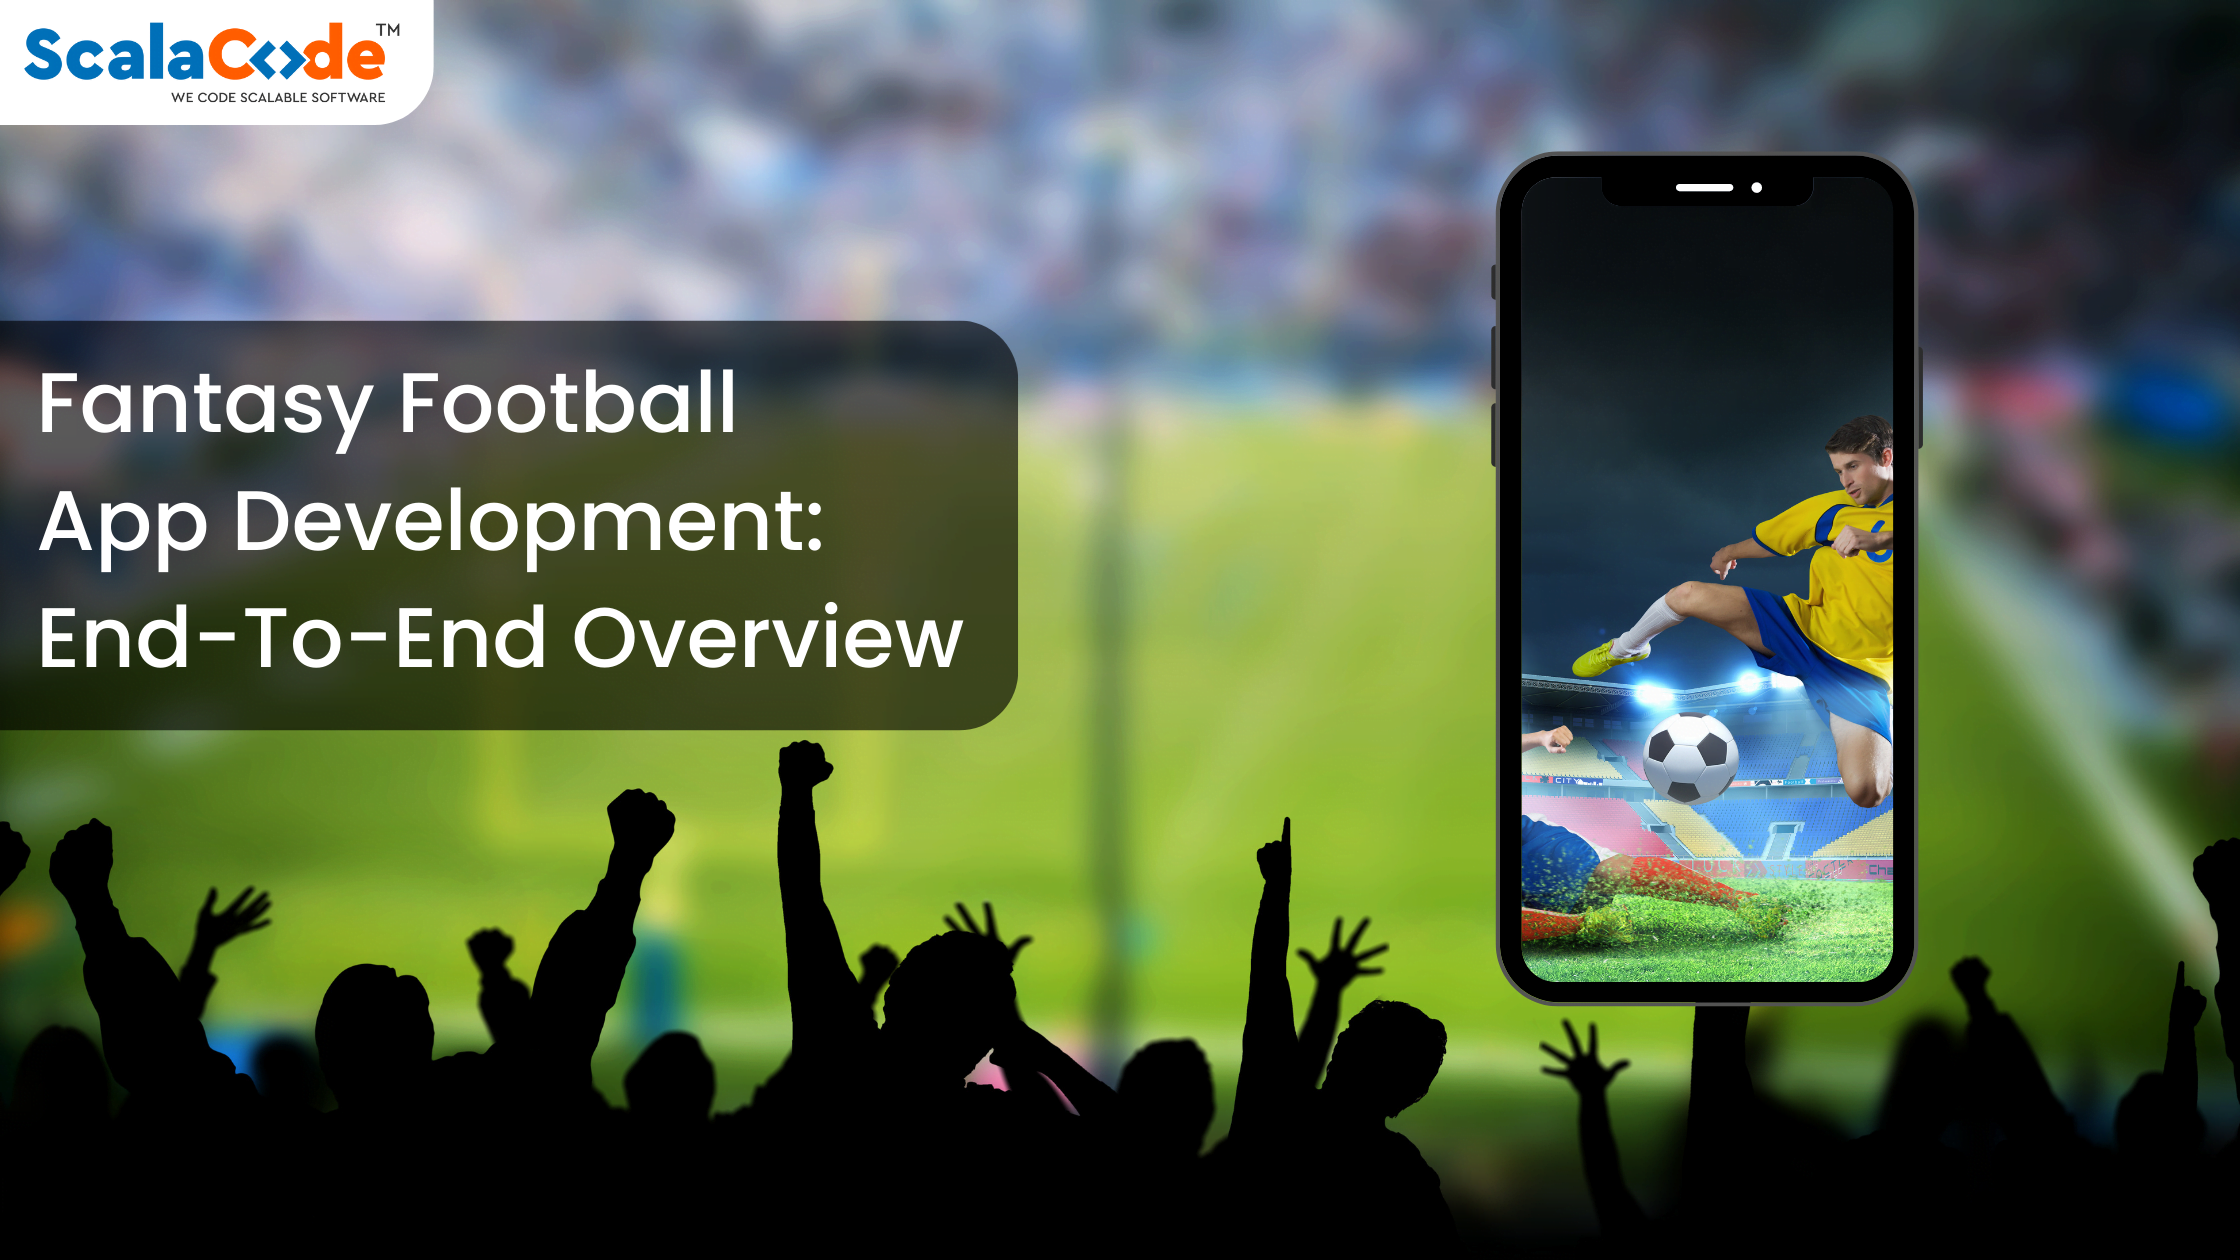 Fantasy Football App Development: End-To-End Overview